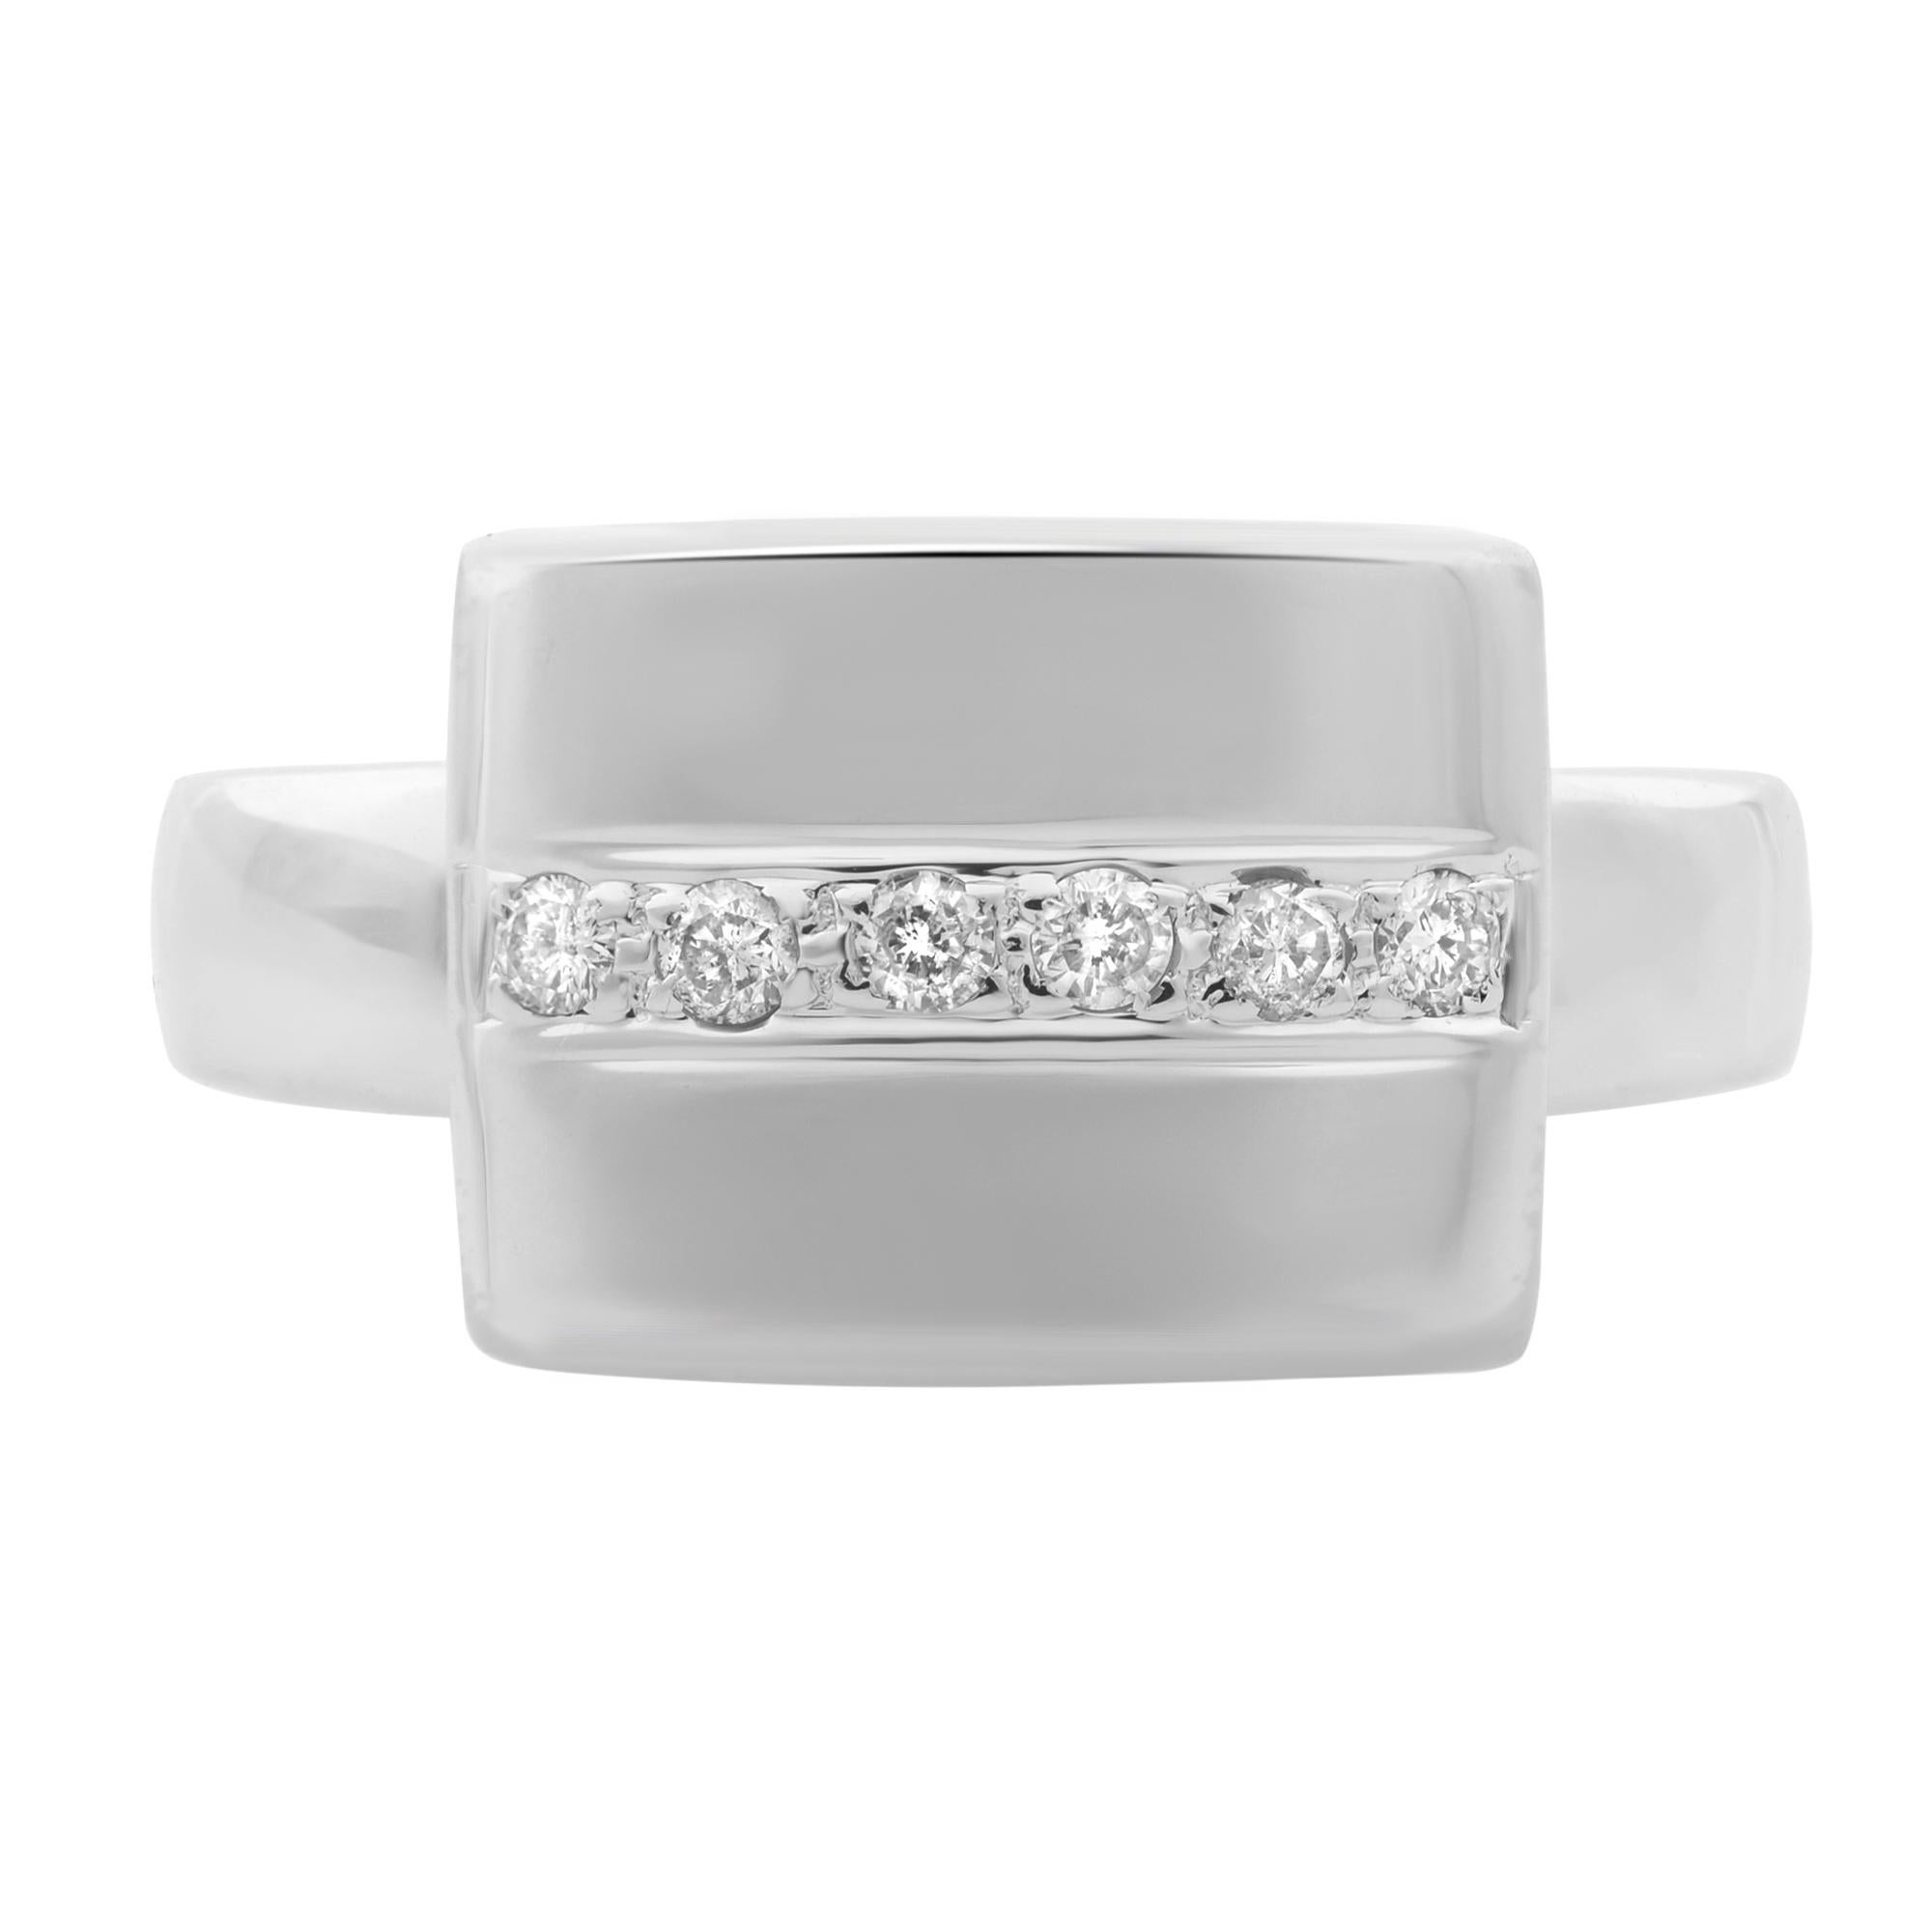 This elegant and classic diamond ring is crafted in 18k white gold. Features a center line of tiny pave set 6 round brilliant cut diamonds with a total carat weight of 0.10. Diamond color H and I clarity. Ring size: 6.75. Total weight: 6.78 grams.